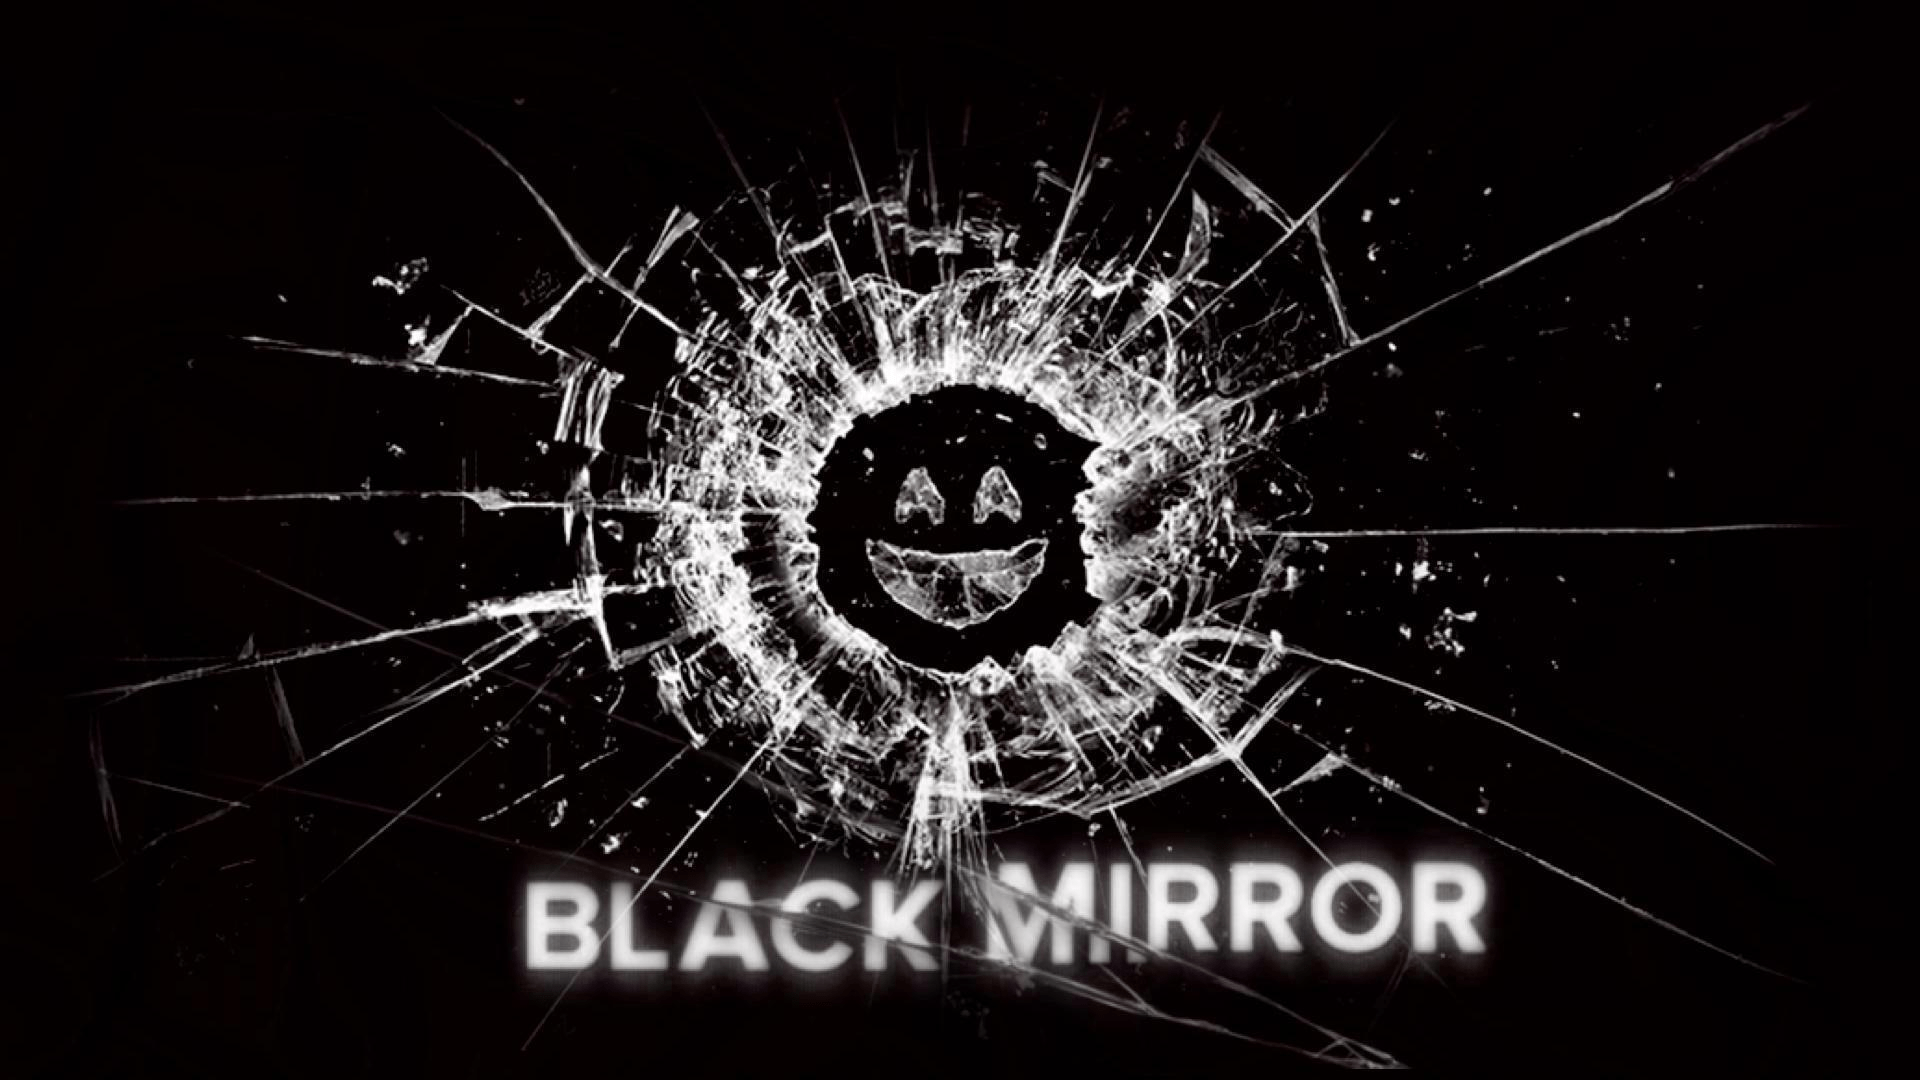 Black Mirror Wallpapers Top Free Black Mirror Backgrounds Images, Photos, Reviews